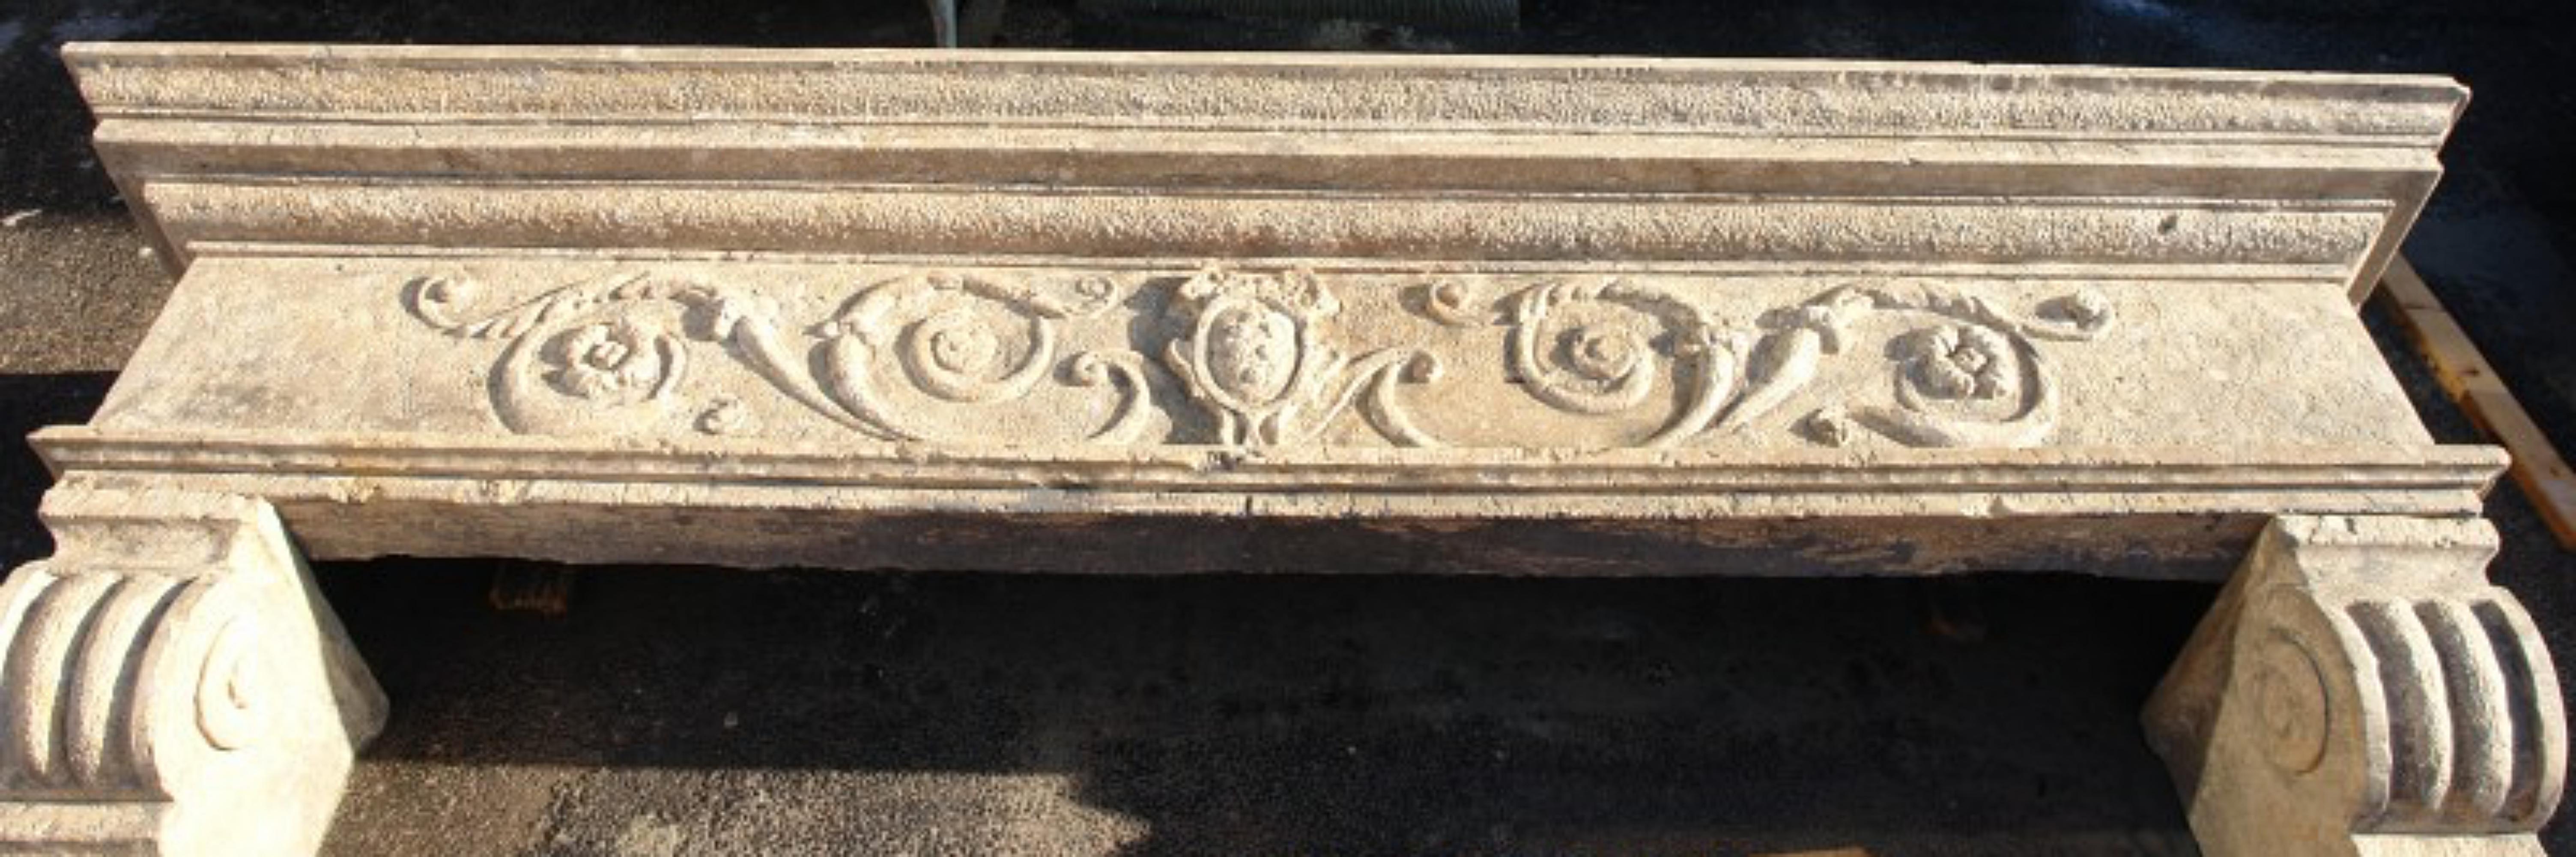 Large Italian Stone Fireplace with Medicean Emblem Early 20th Century For Sale 1